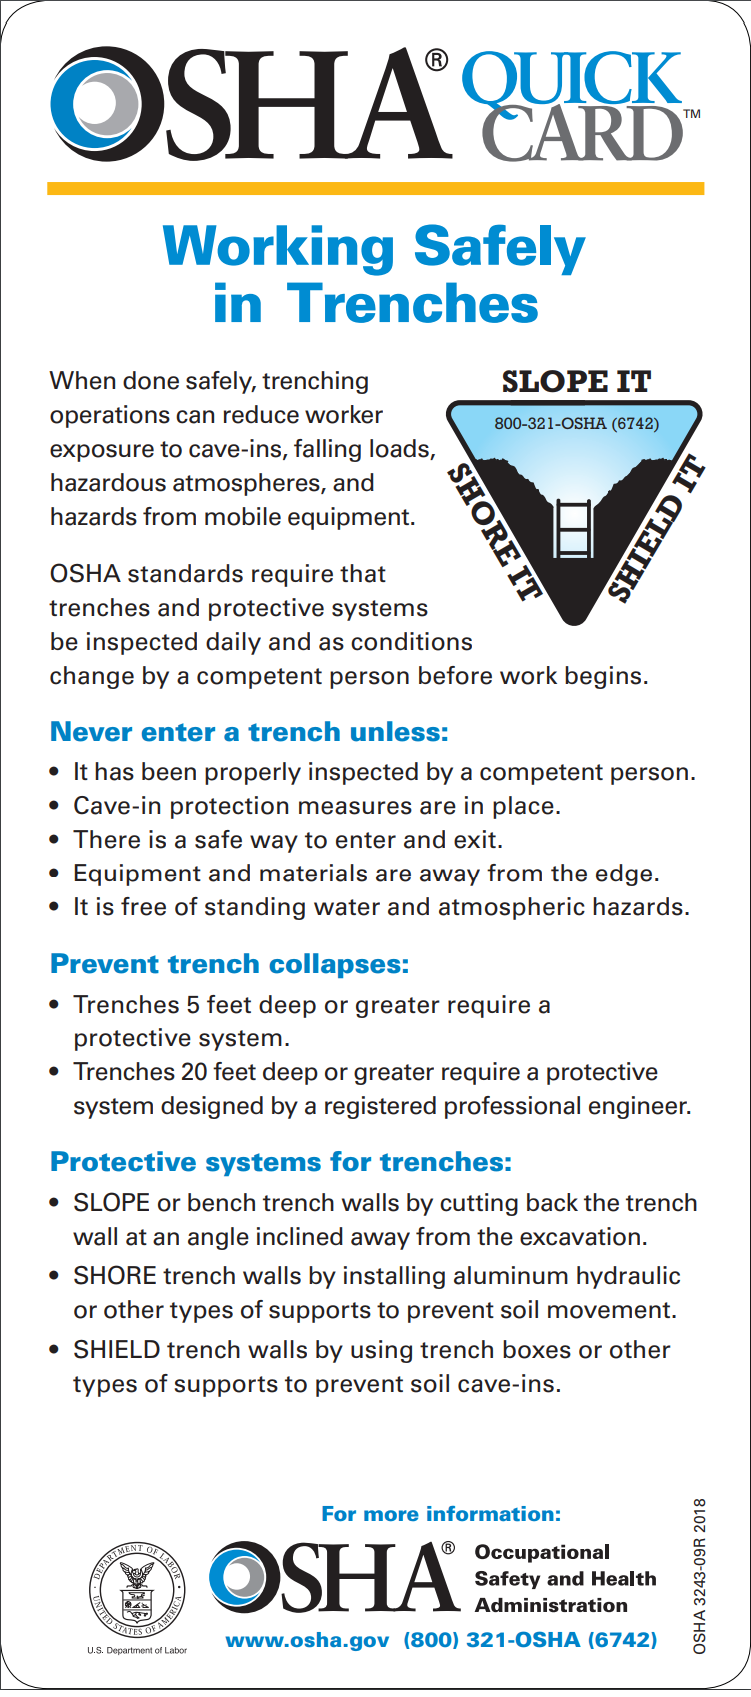 OSHA QUICKCARD™: WORKING SAFELY IN TRENCHES